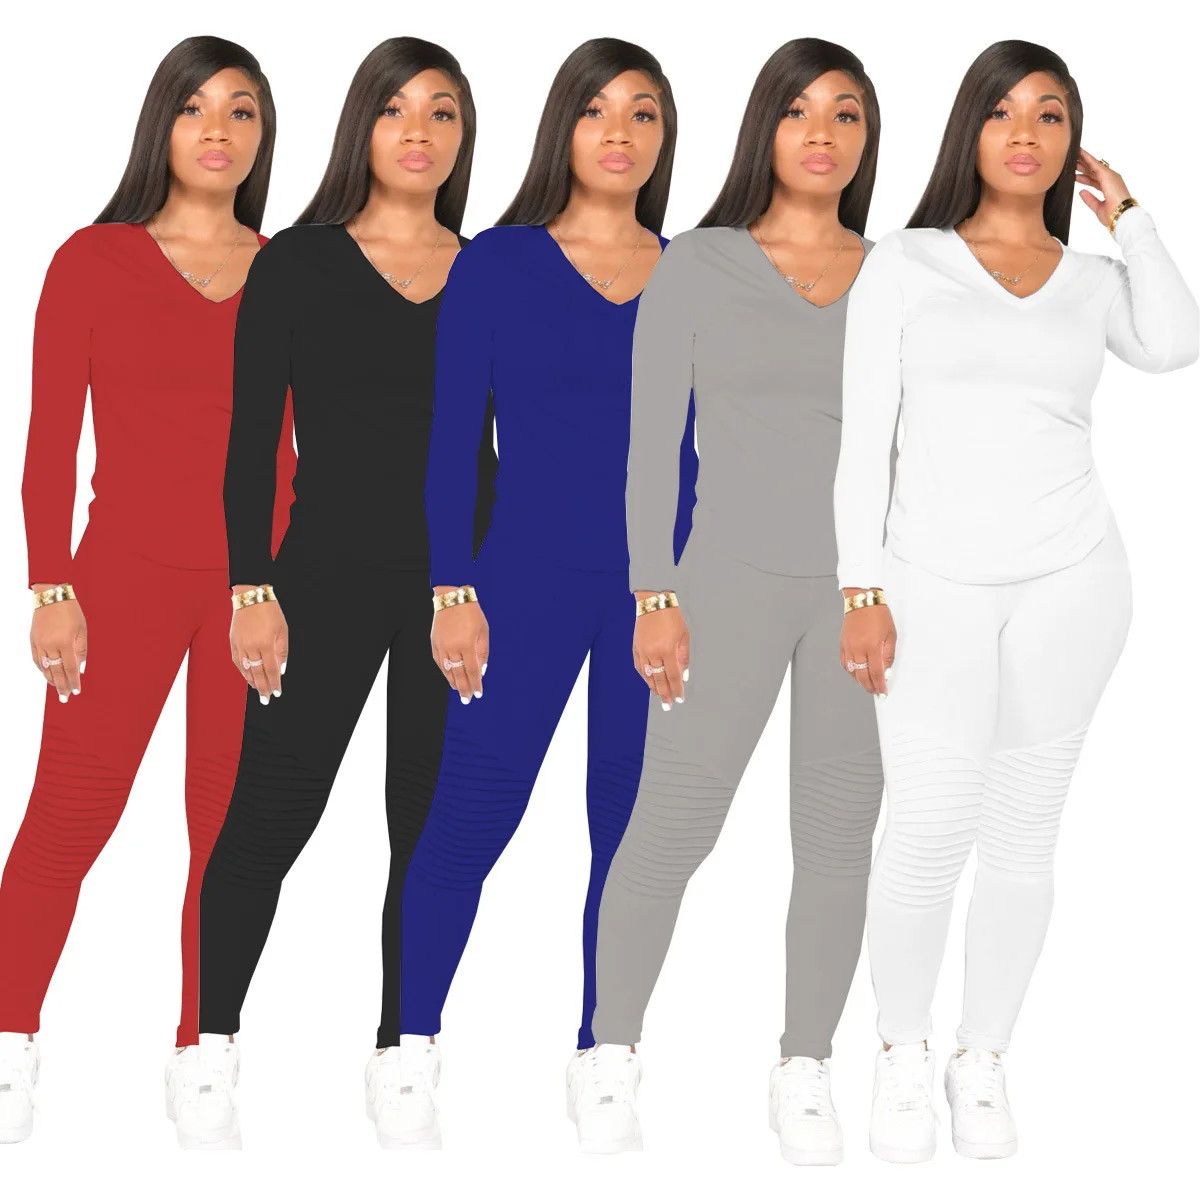 

Foma WY6711 Casual V neck womens jogging track suit 2 piece pants set ladies sweat suits, As pictures